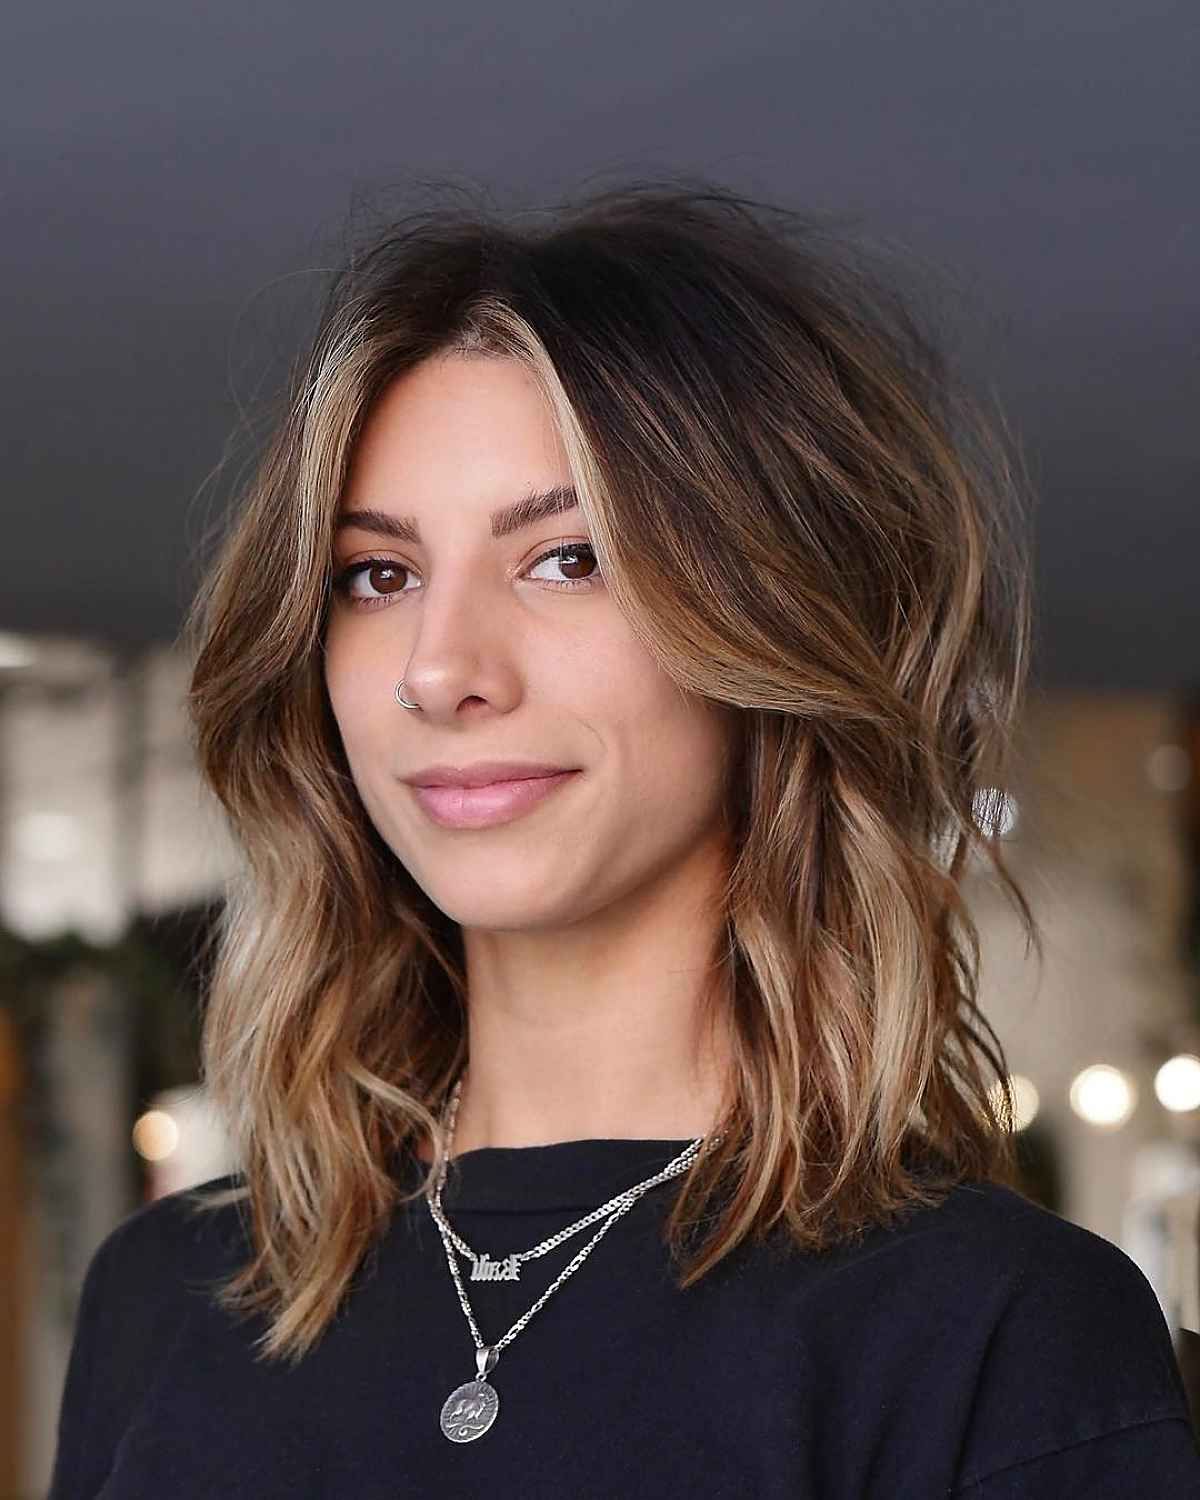 35 Coolest Shoulder Length Hair With Curtain Bangs You've Gotta See Throughout Most Popular Shoulder Length Shag With Curtain Bangs (View 11 of 18)